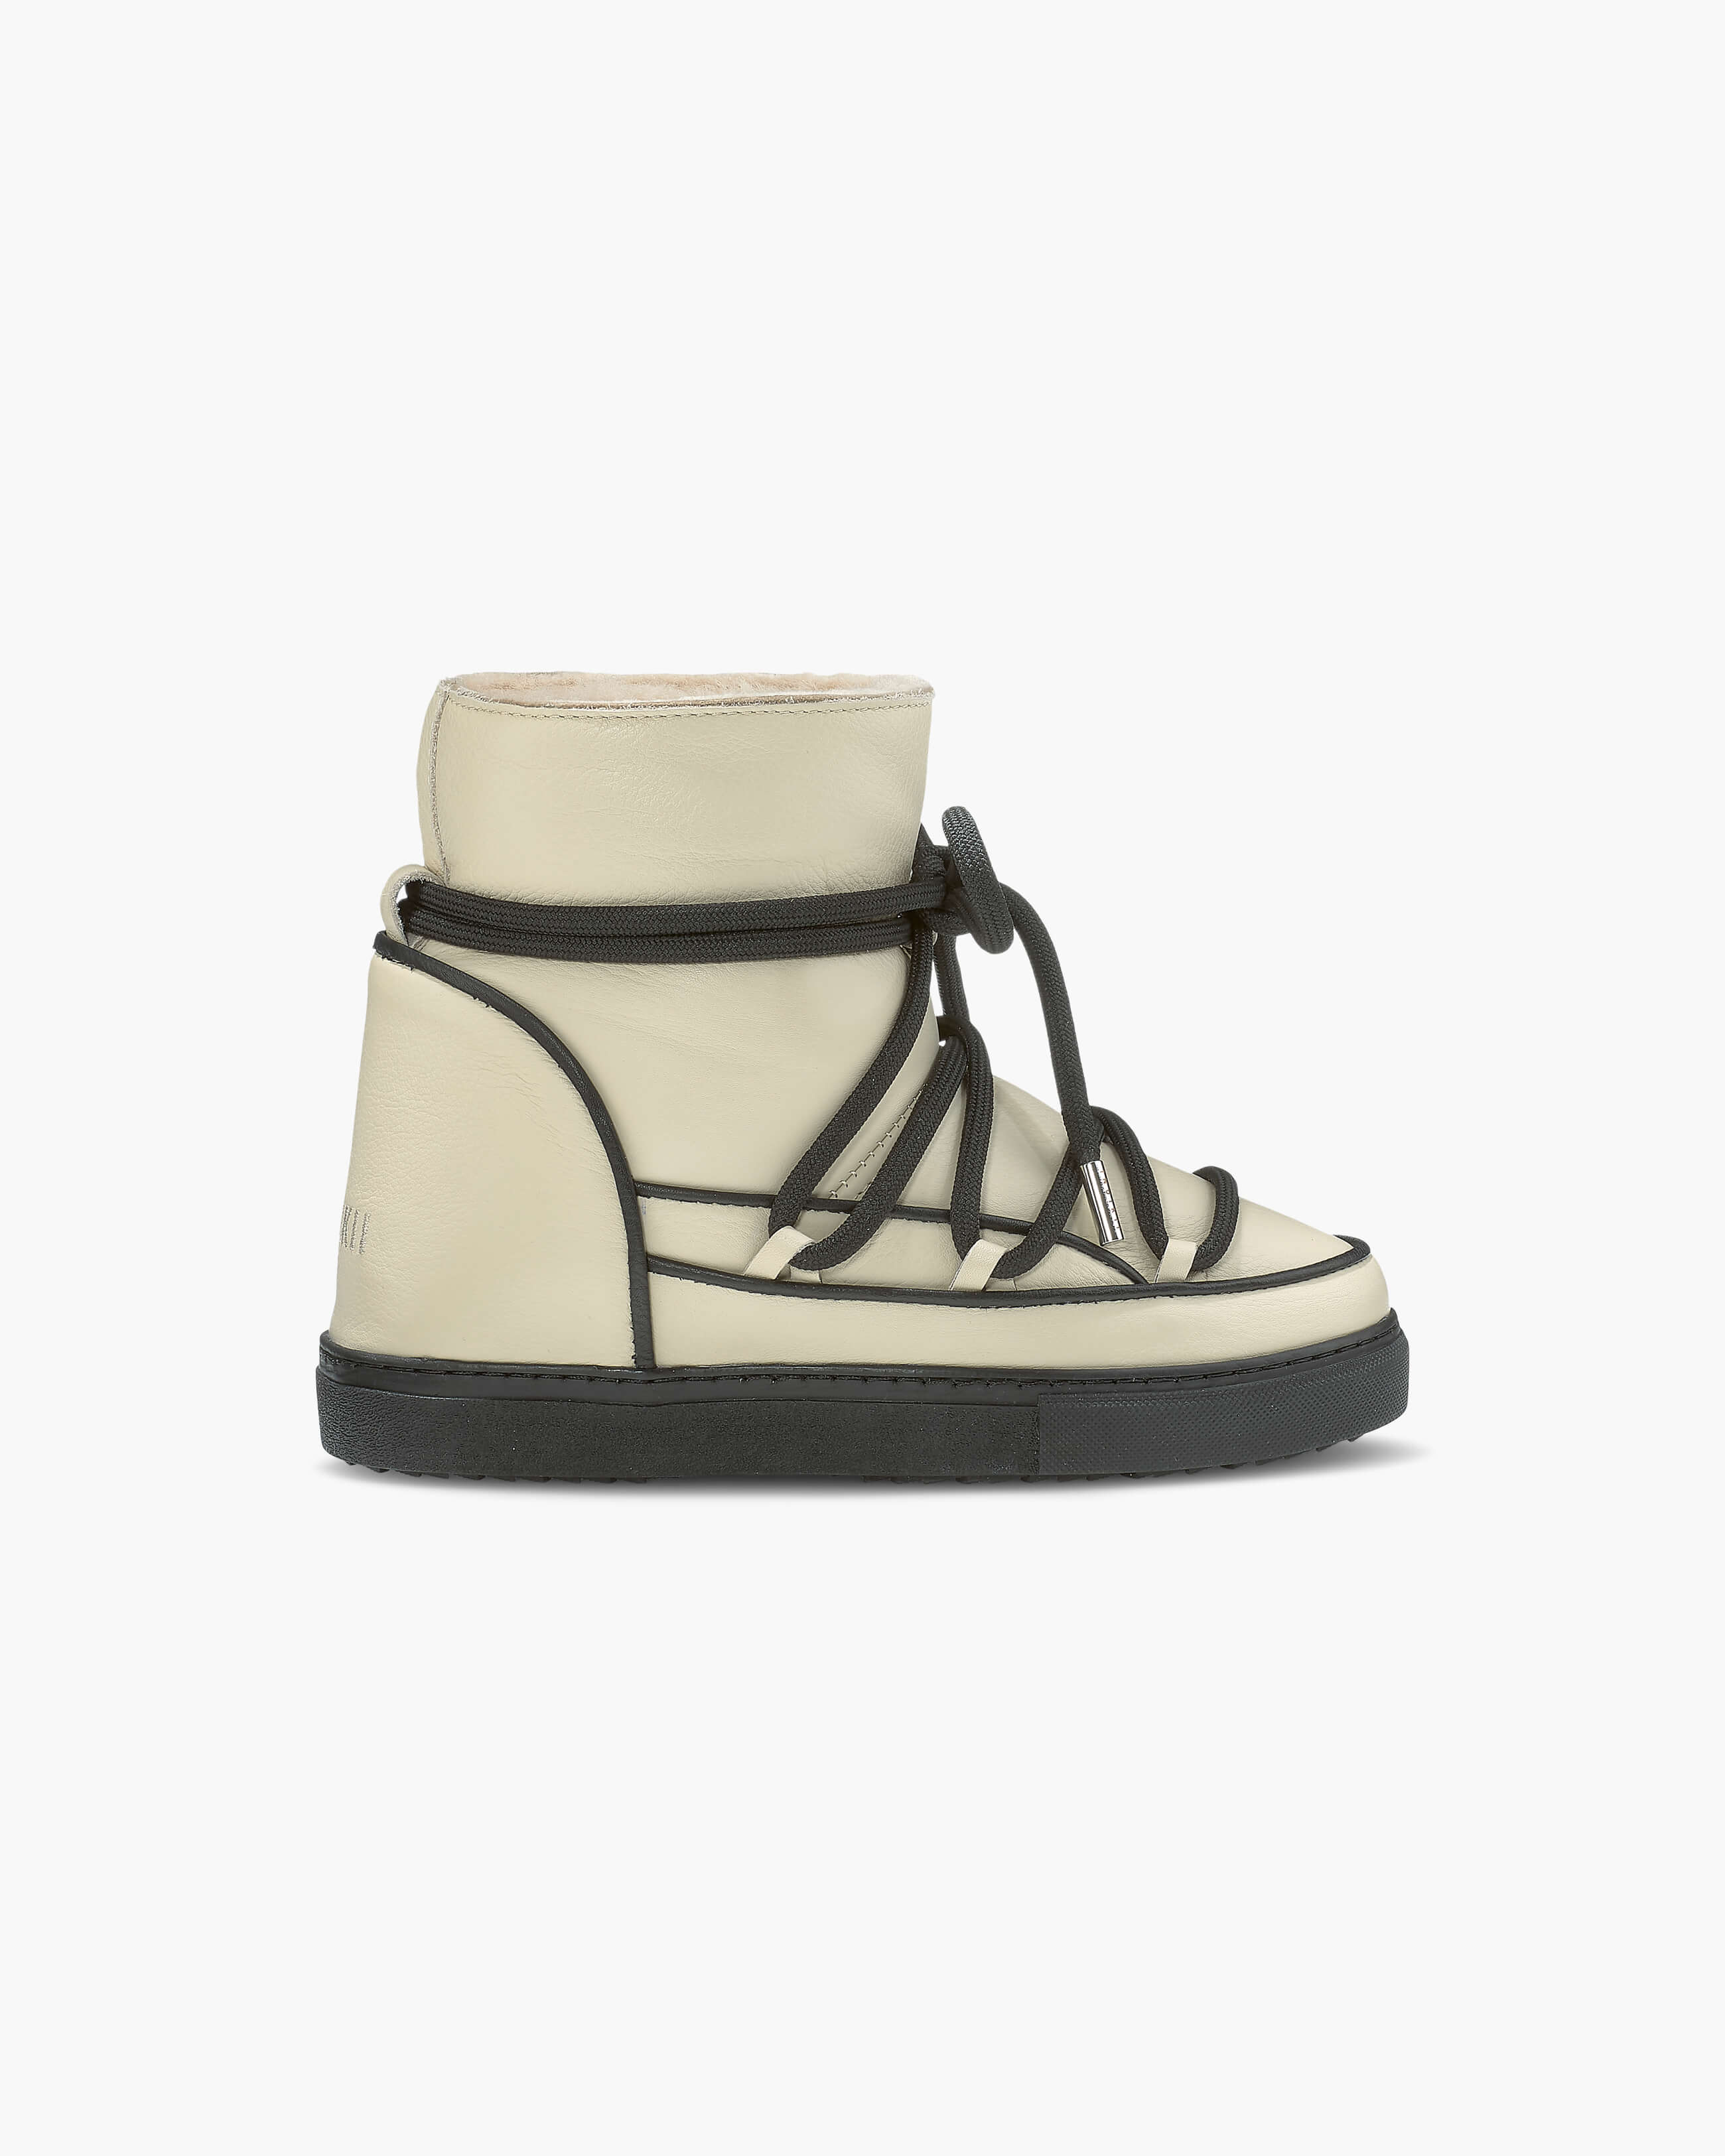 Full Leather Pastelle Wedge